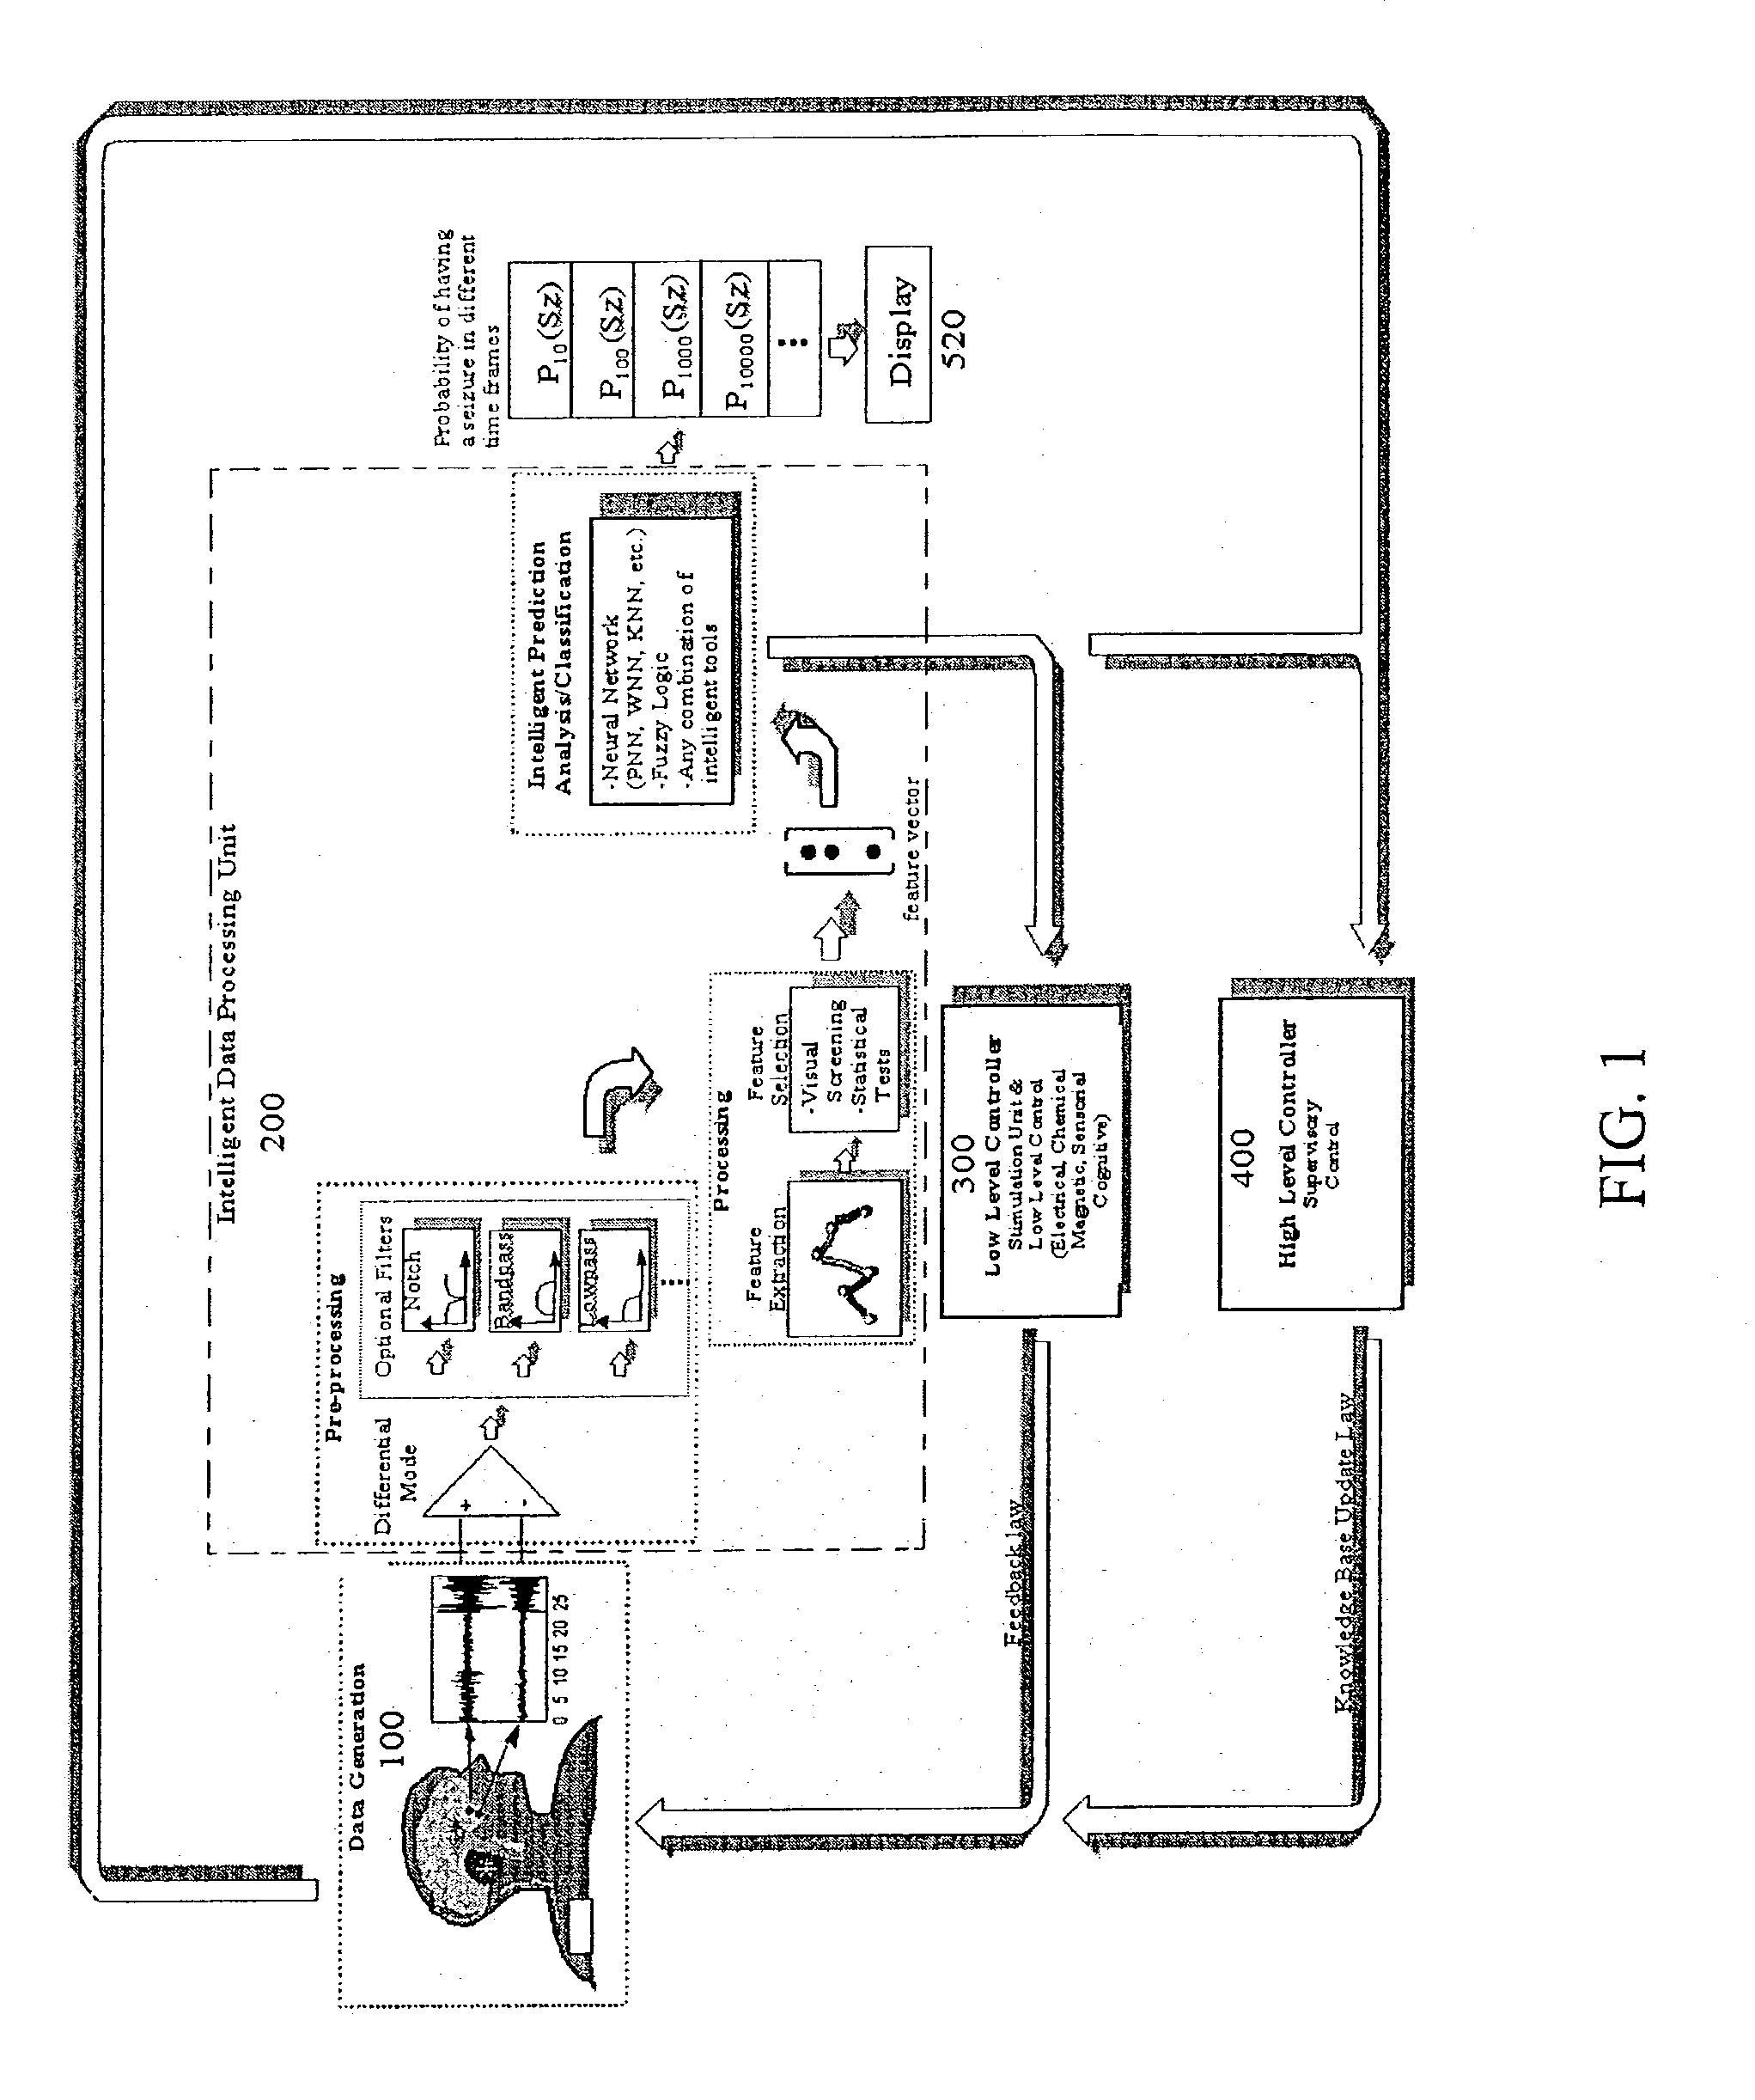 Adaptive method and apparatus for forecasting and controlling neurological disturbances under a multi-level control